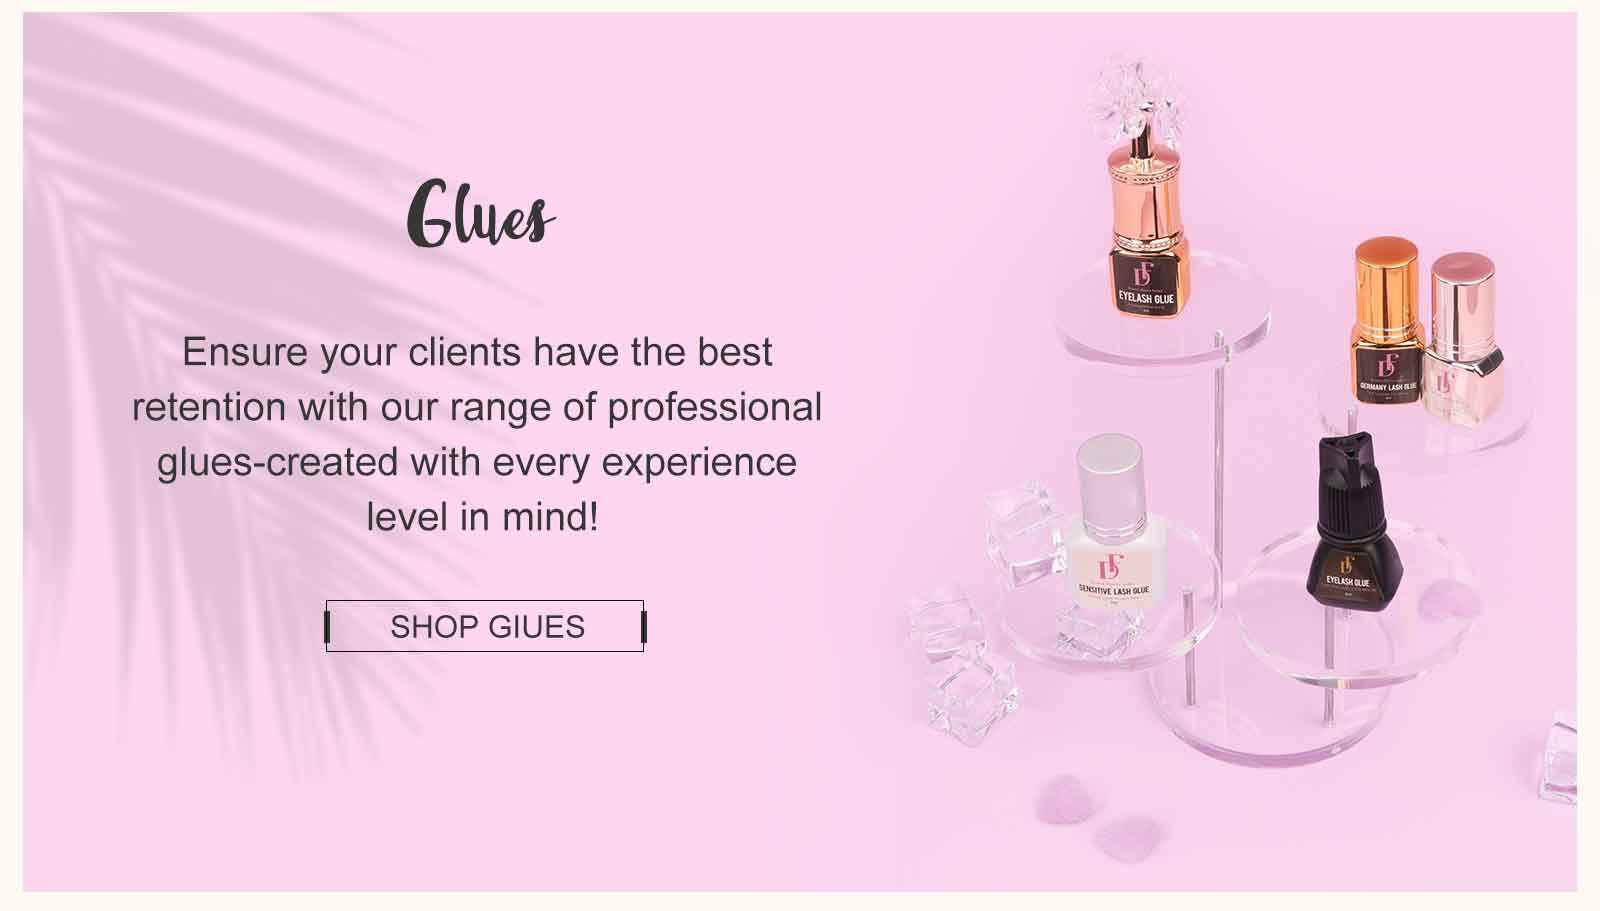 Glues Ensure your clients have the best retention with our range of professional glues-created with every experience level in mind! SHOP GIUES v e s it 